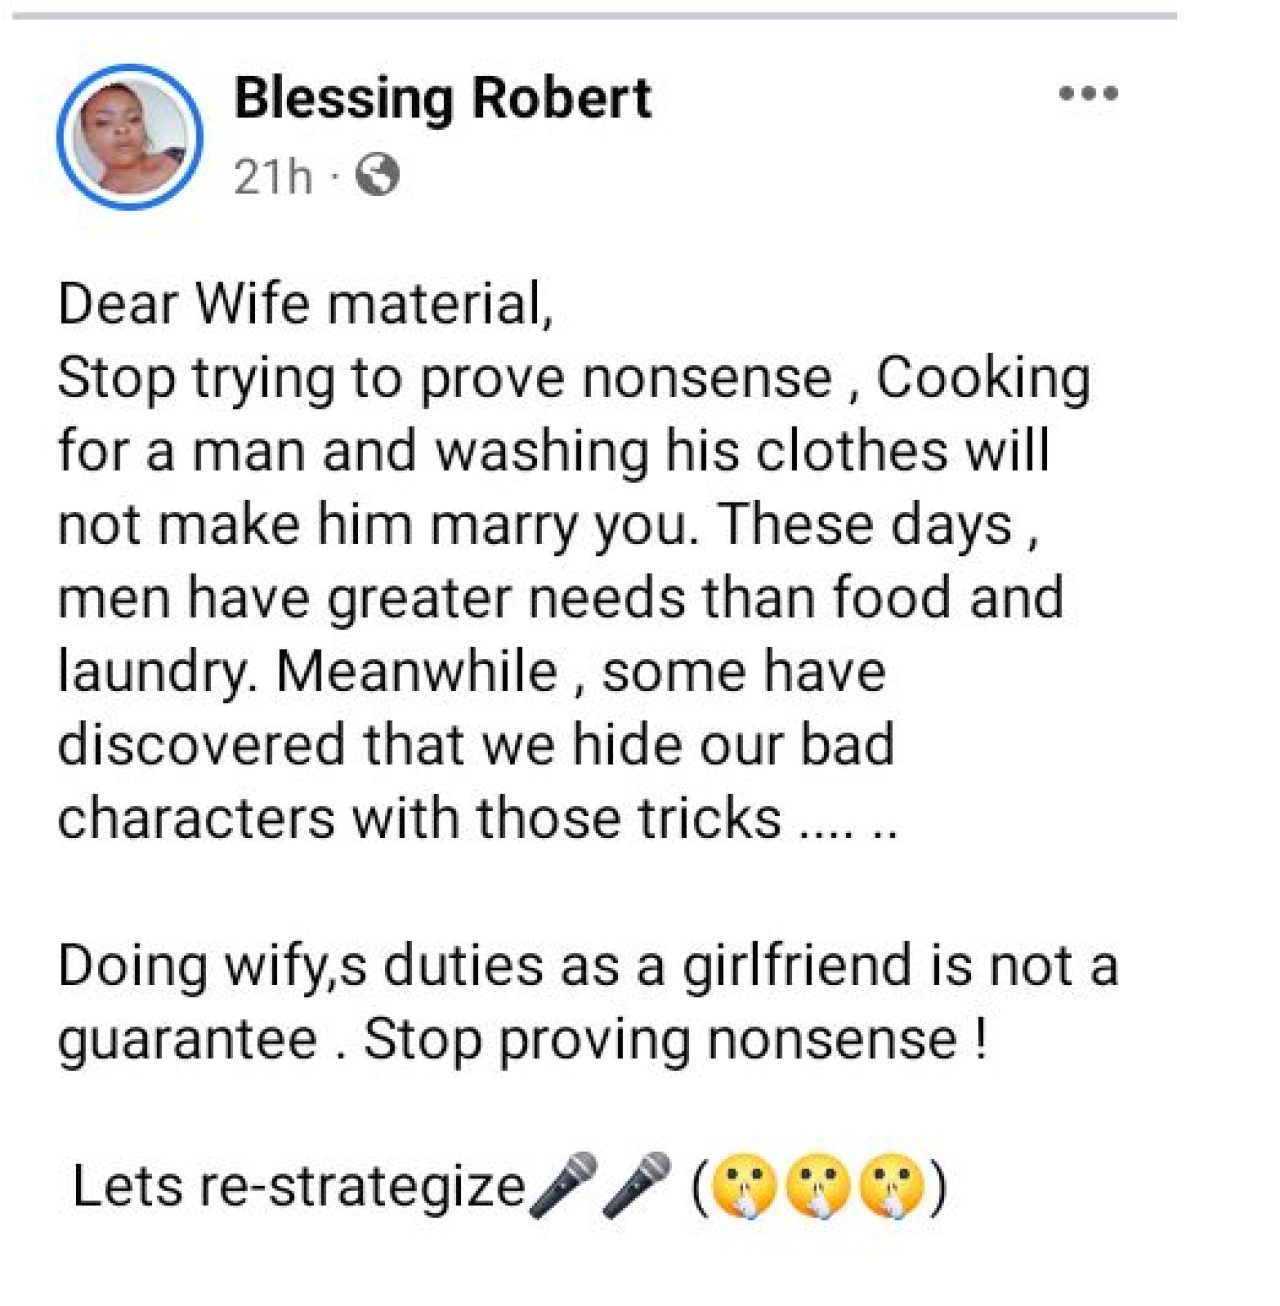 "Guys have realized that we conceal our negative traits with ploys like cooking and doing laundry; - Nigerian lady advises 'wife material' to re-strategize. Afro News Wire